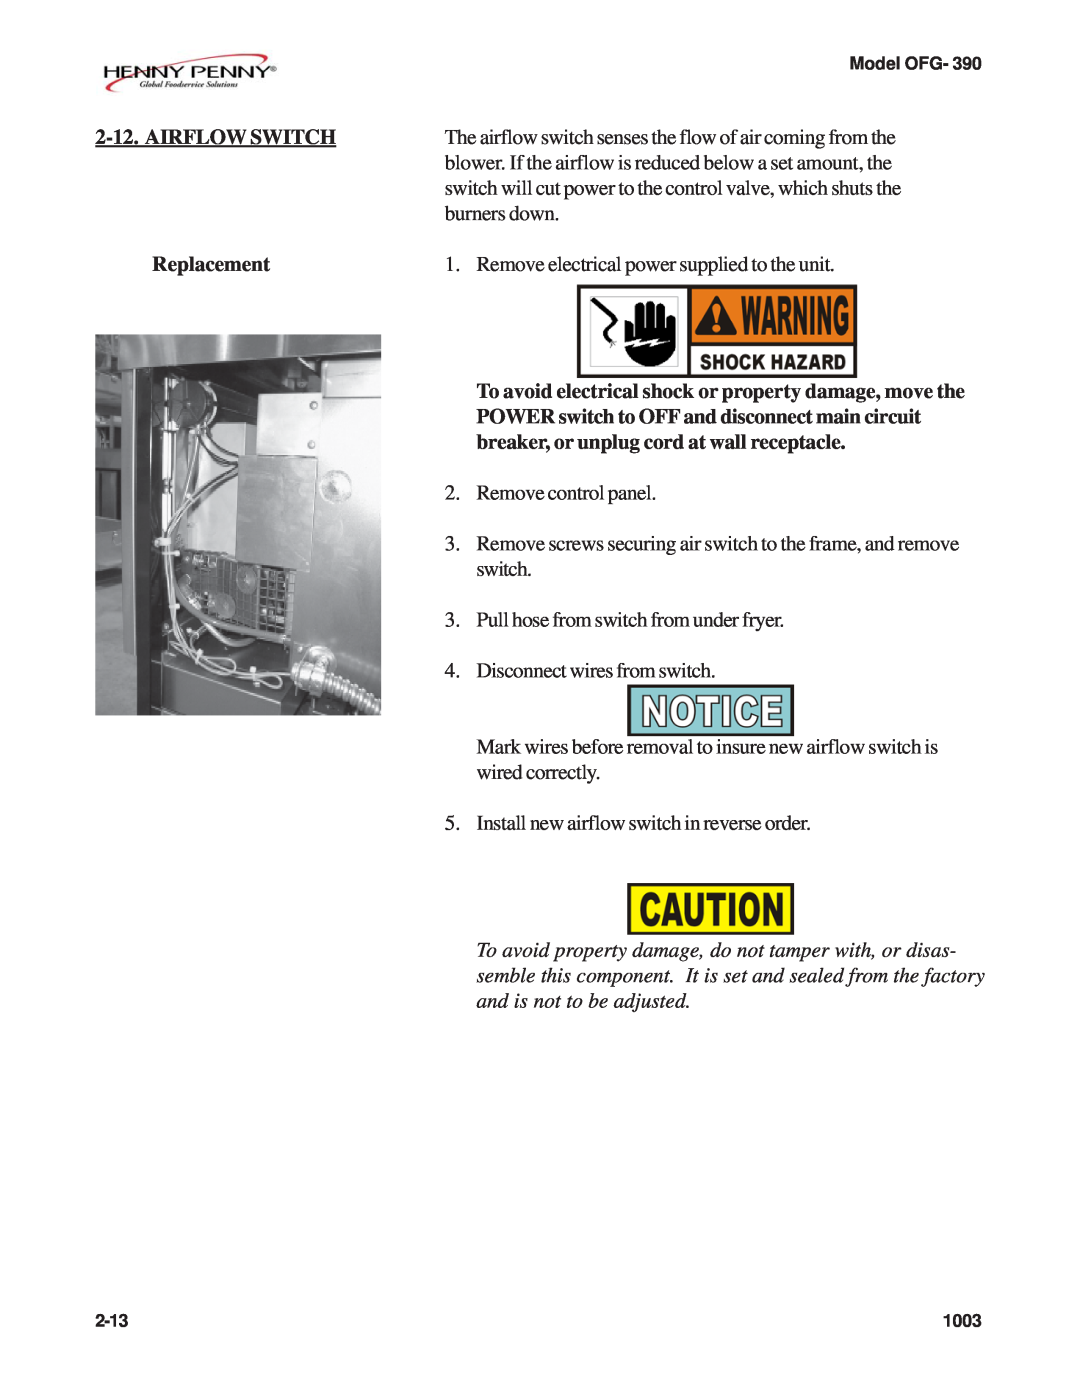 Henny Penny OFG-392 technical manual Airflow Switch, Replacement 